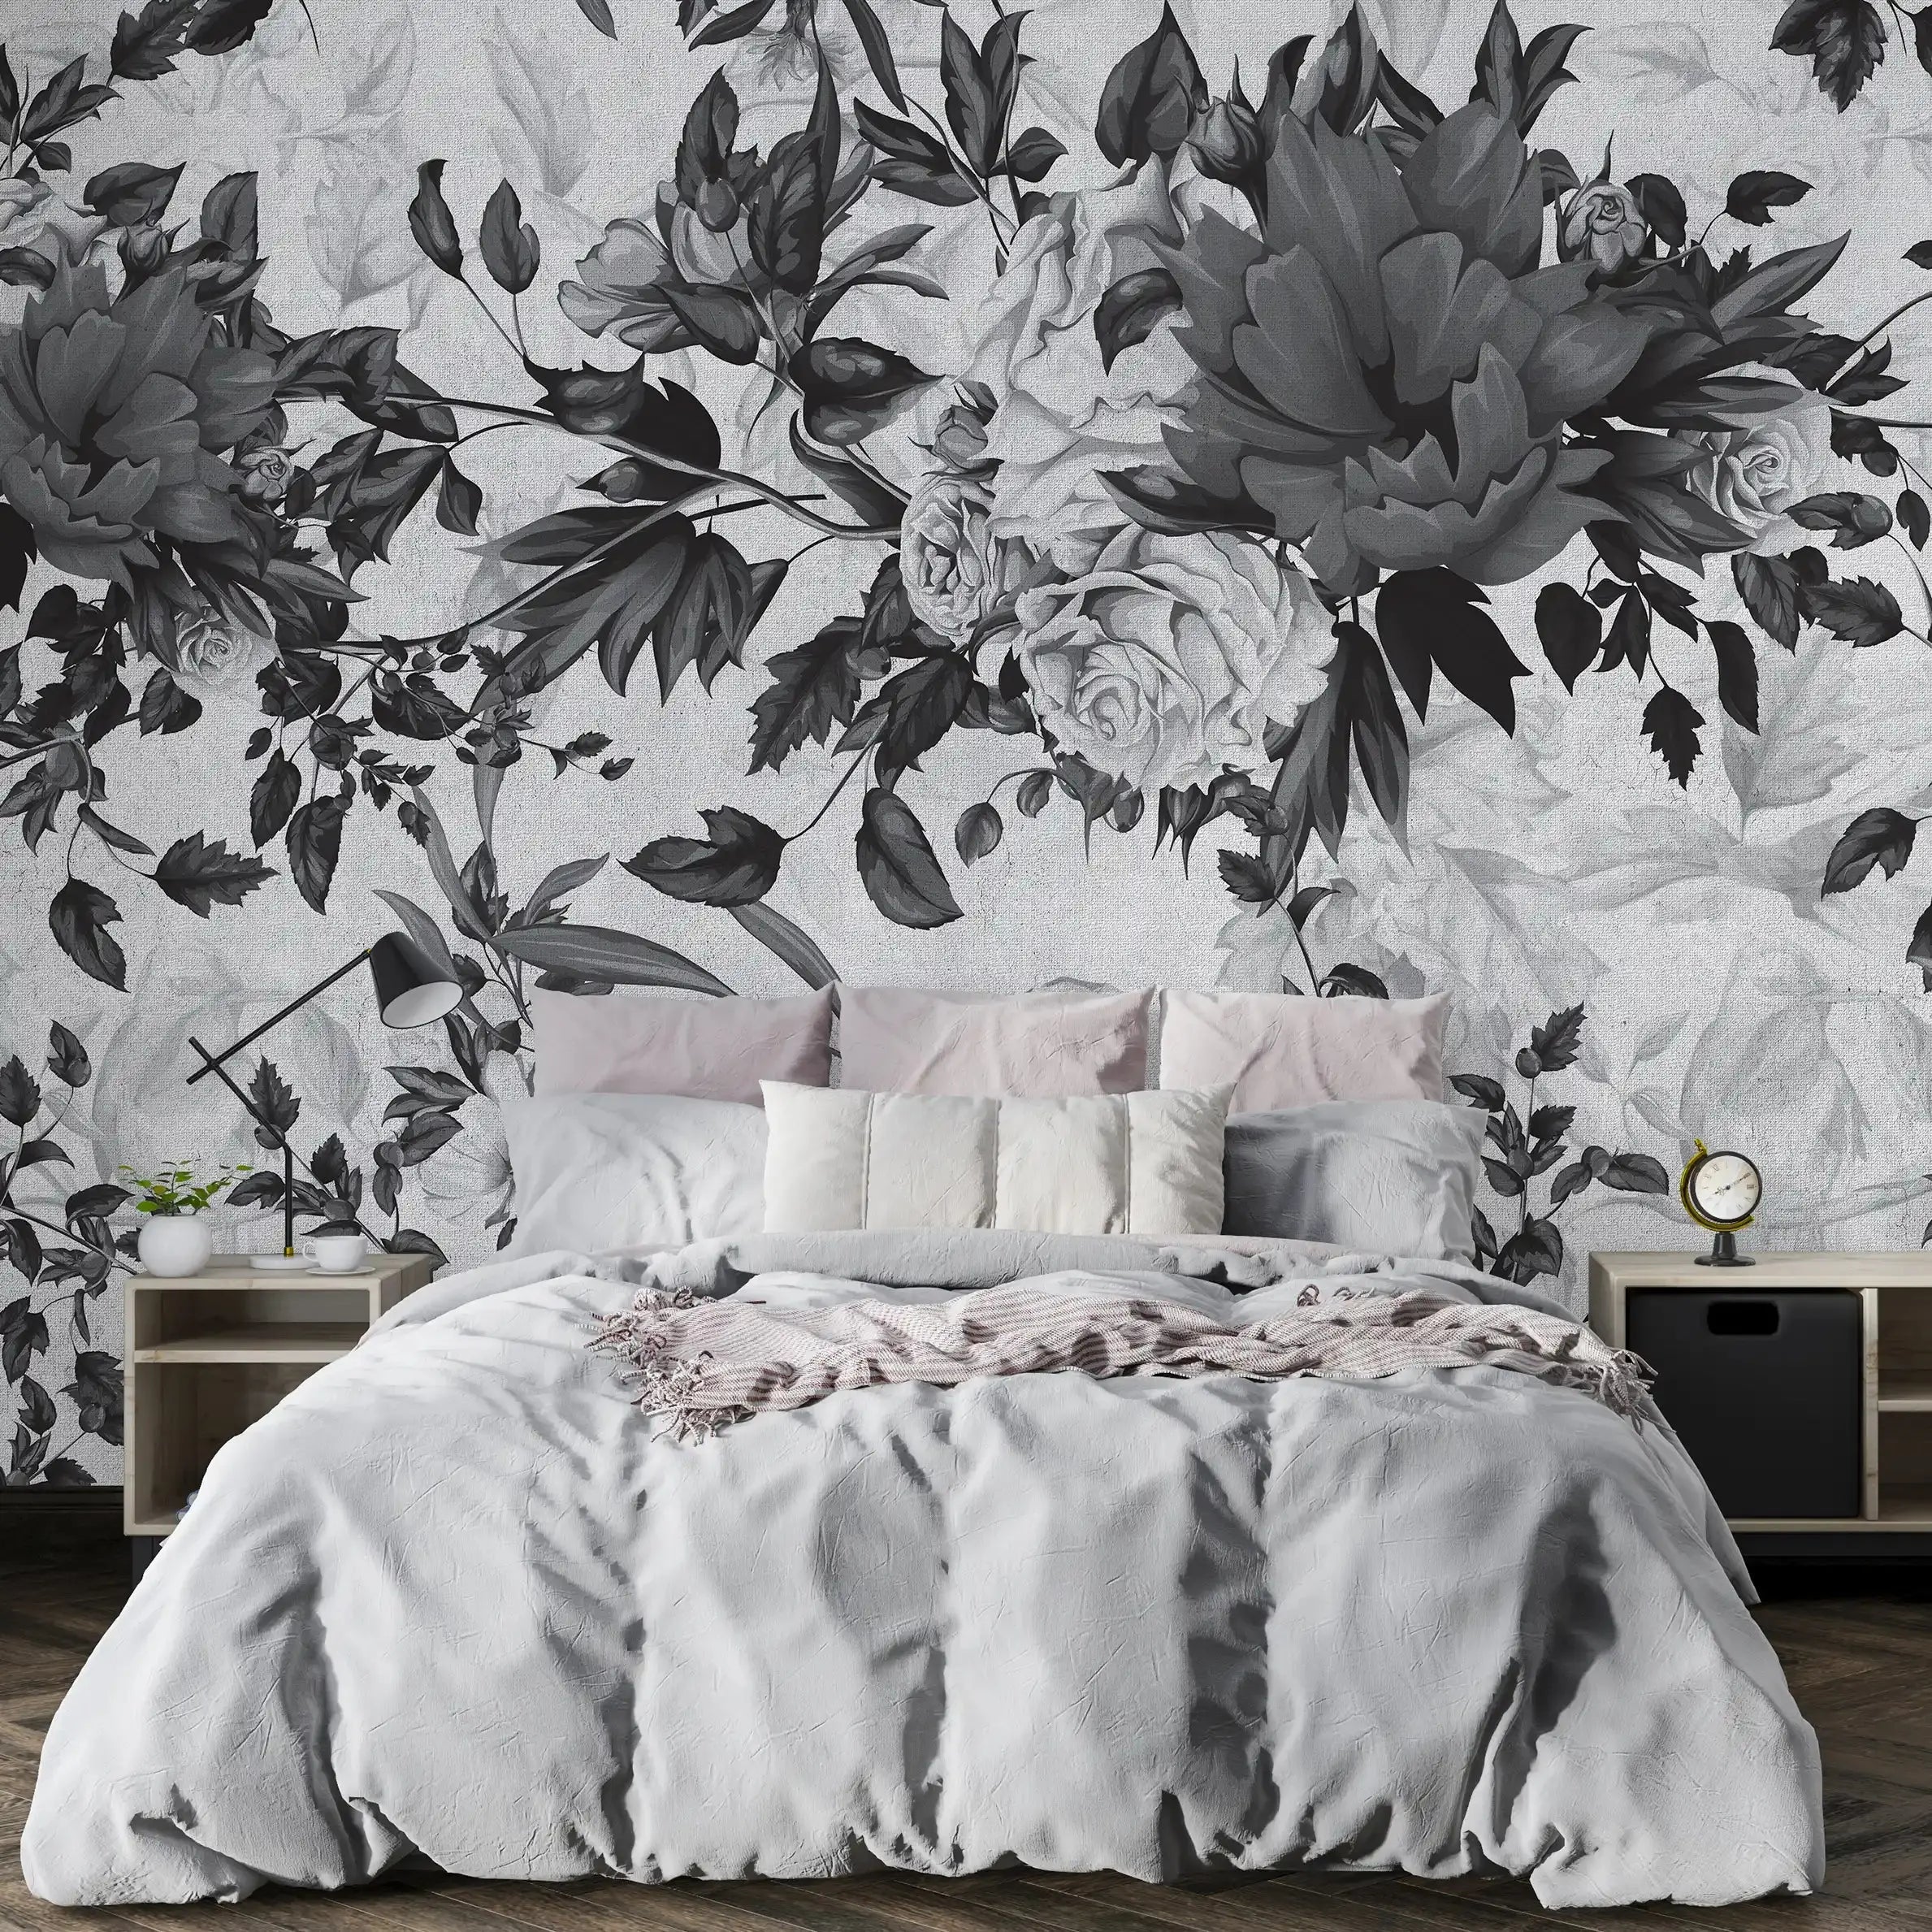 3045-E / Peel and Stick Wallpaper Floral - Large Grey Flowers Design, Adhesive Decorative Paper for Bedroom, Kitchen, and Bathroom - Artevella